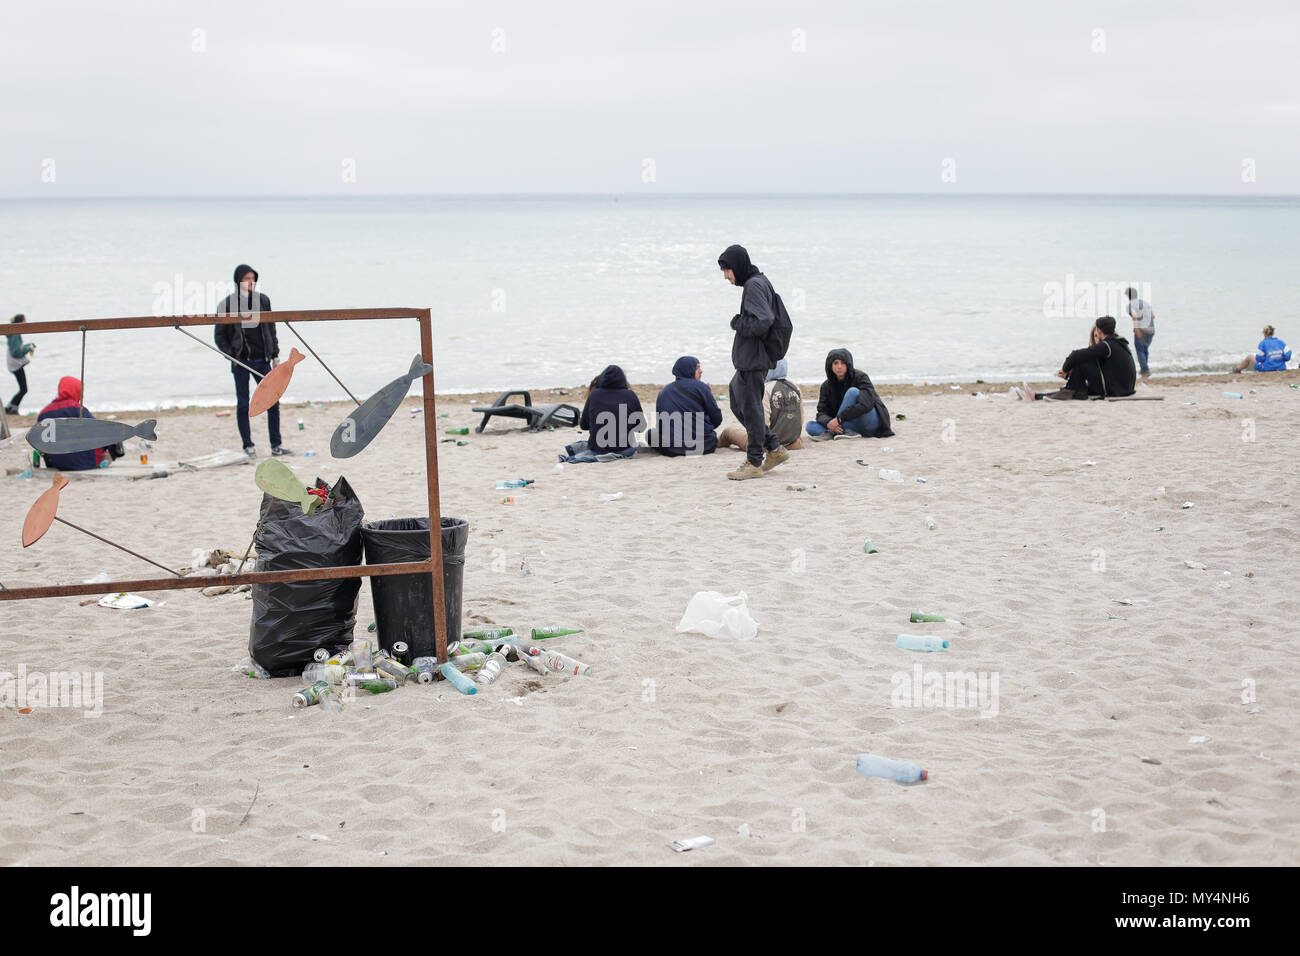 VAMA VECHE, ROMANIA - MAY 1, 2018: Young people rest on the beach amongst debris (especially empty bottles), after partying all night, early in the mo Stock Photo